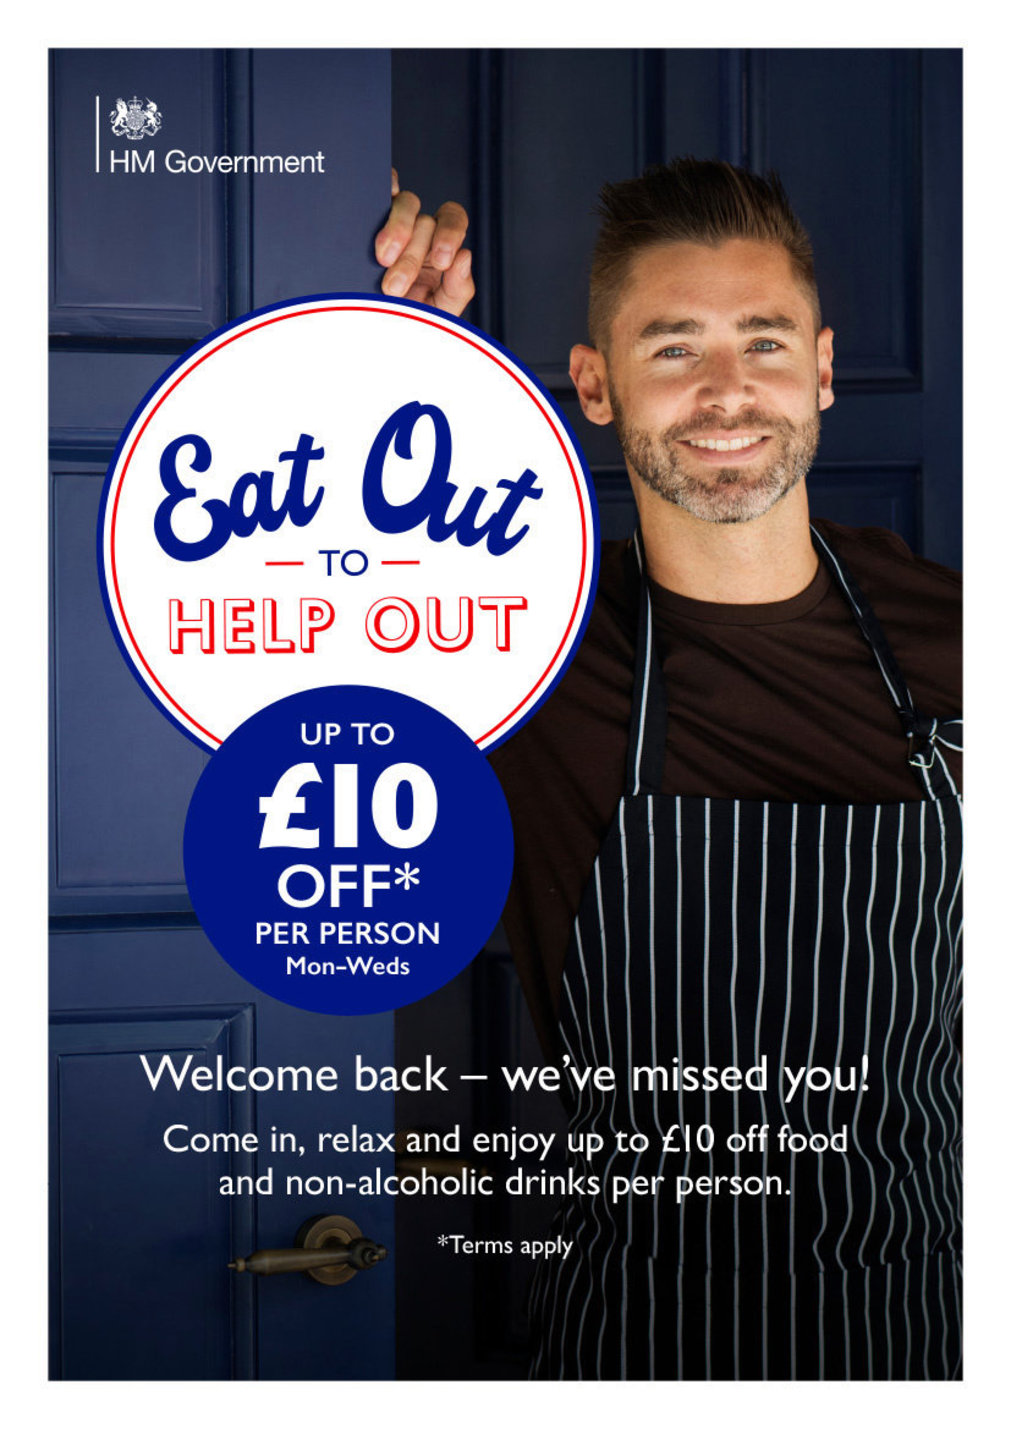 Restaurants sign up to Eat Out to Help Out scheme